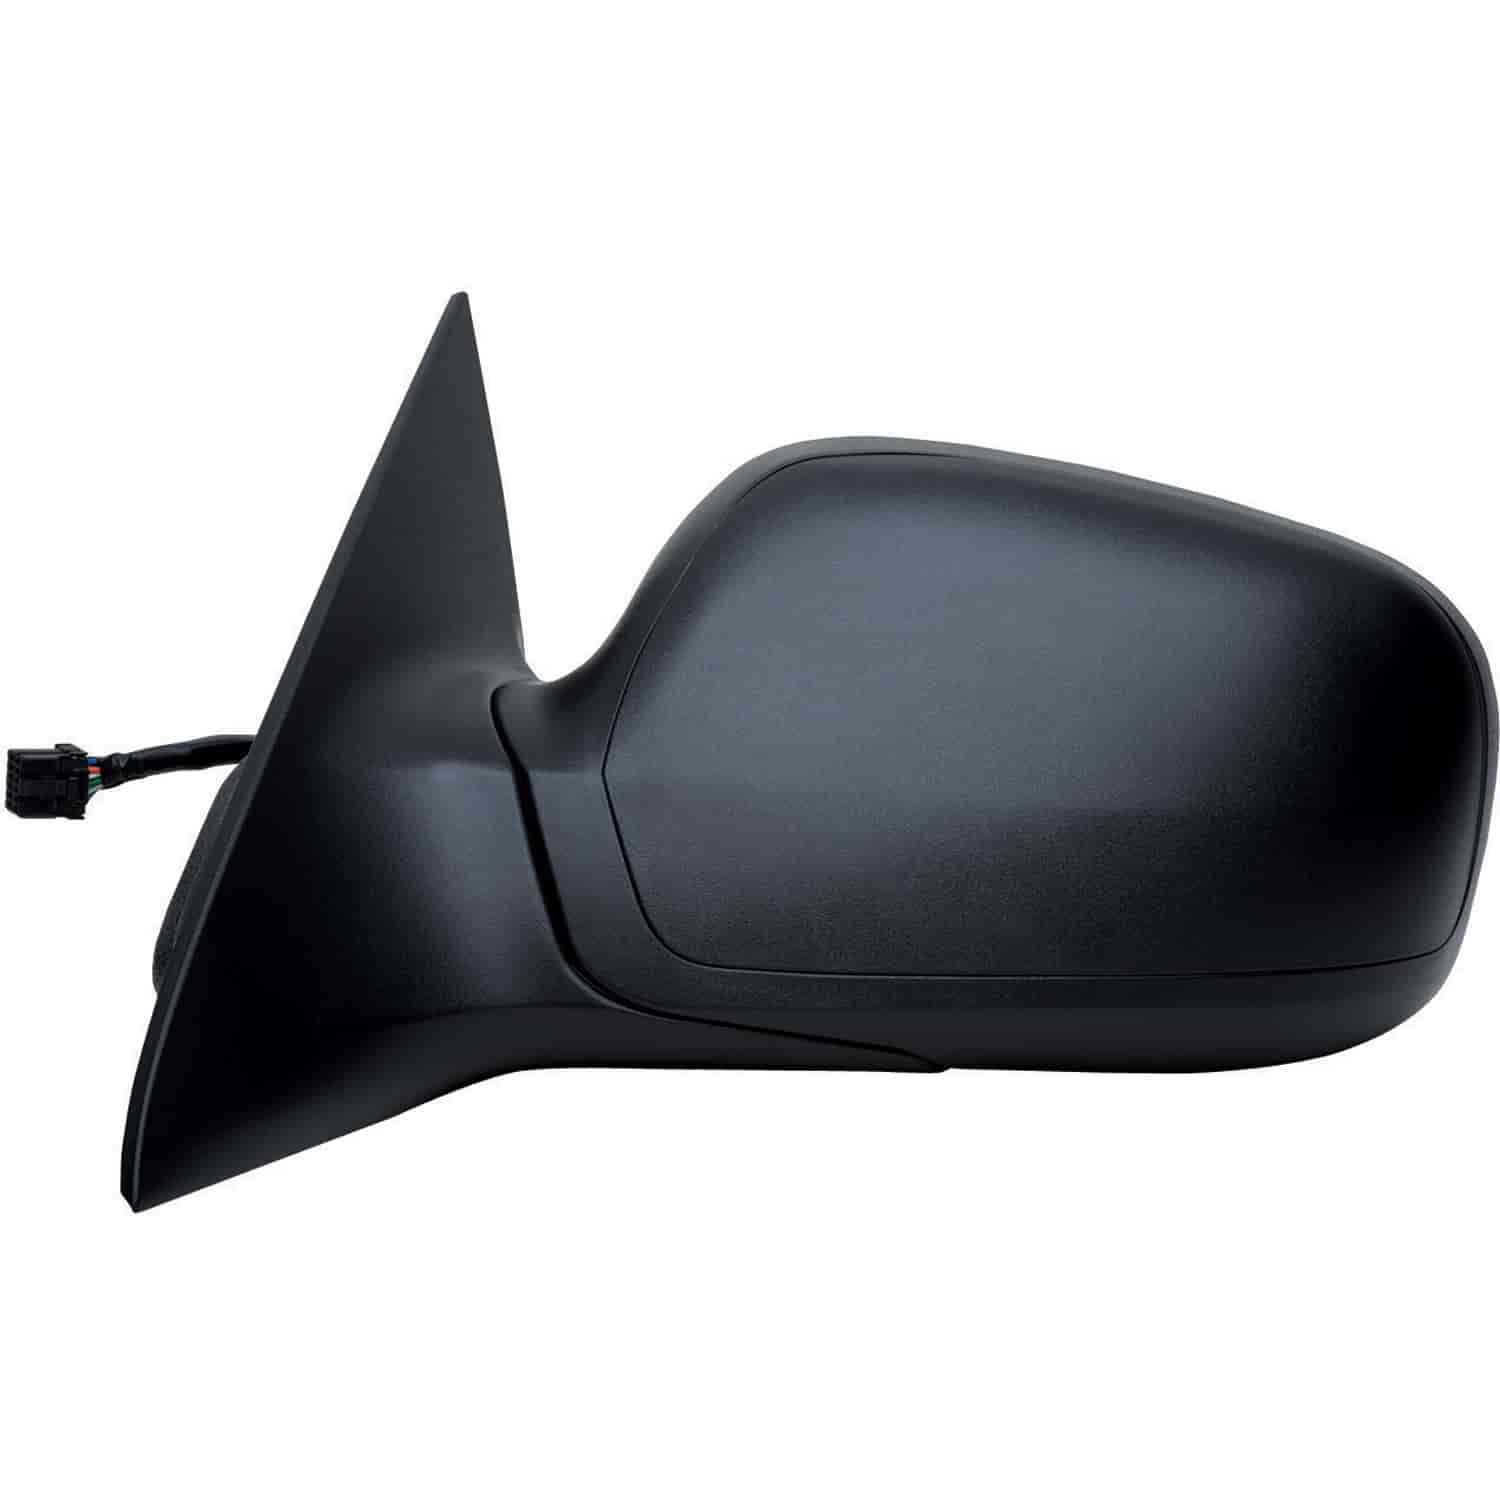 OEM Style Replacement mirror for 06-08 Chrysler Pacifica code GTS driver side mirror tested to fit a